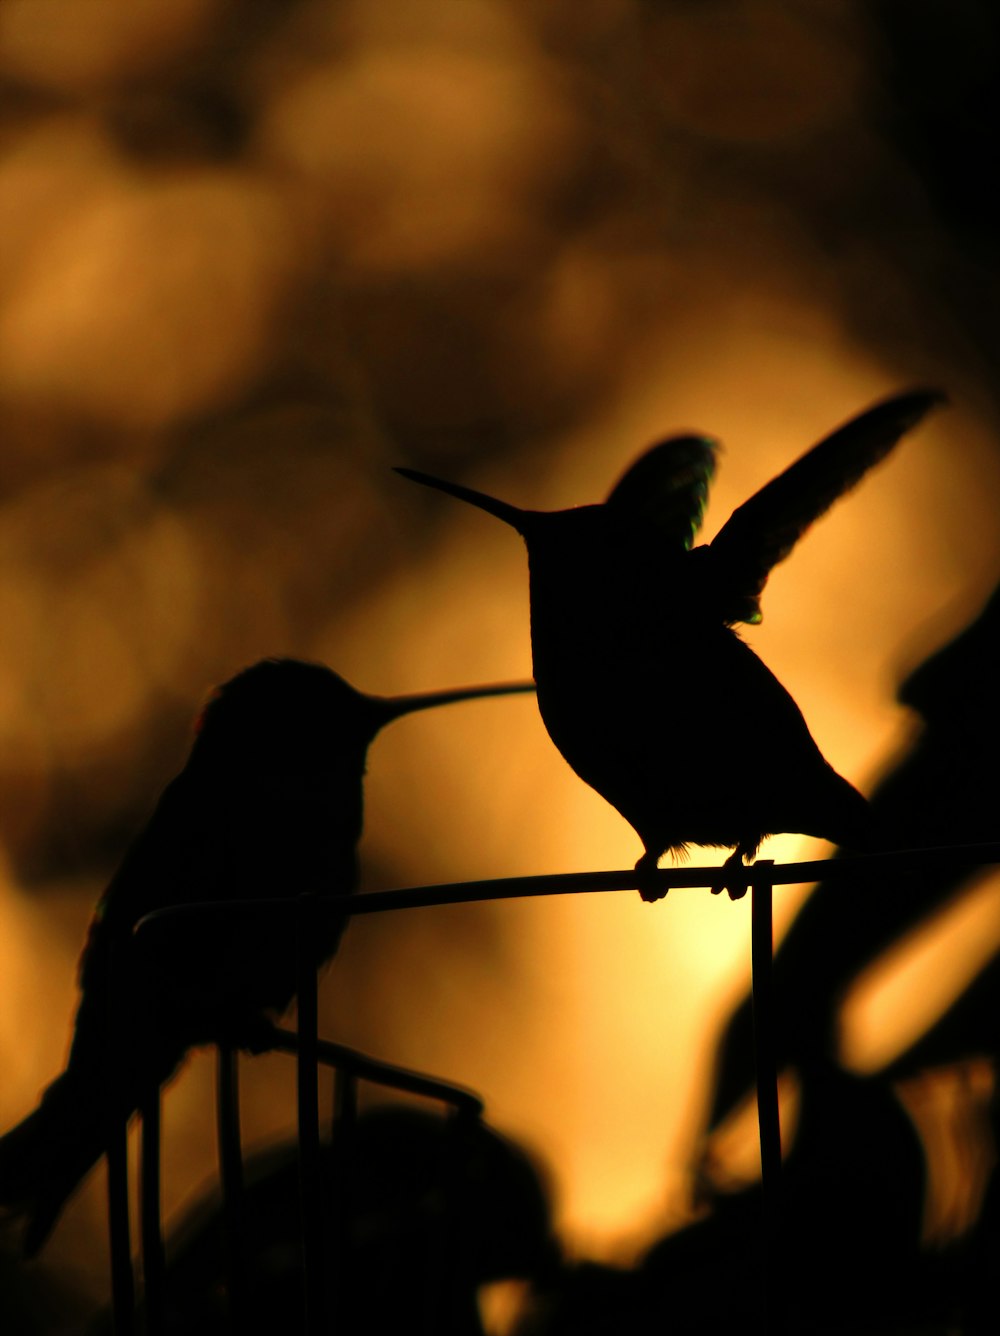 silhouette of bird on black metal fence during daytime